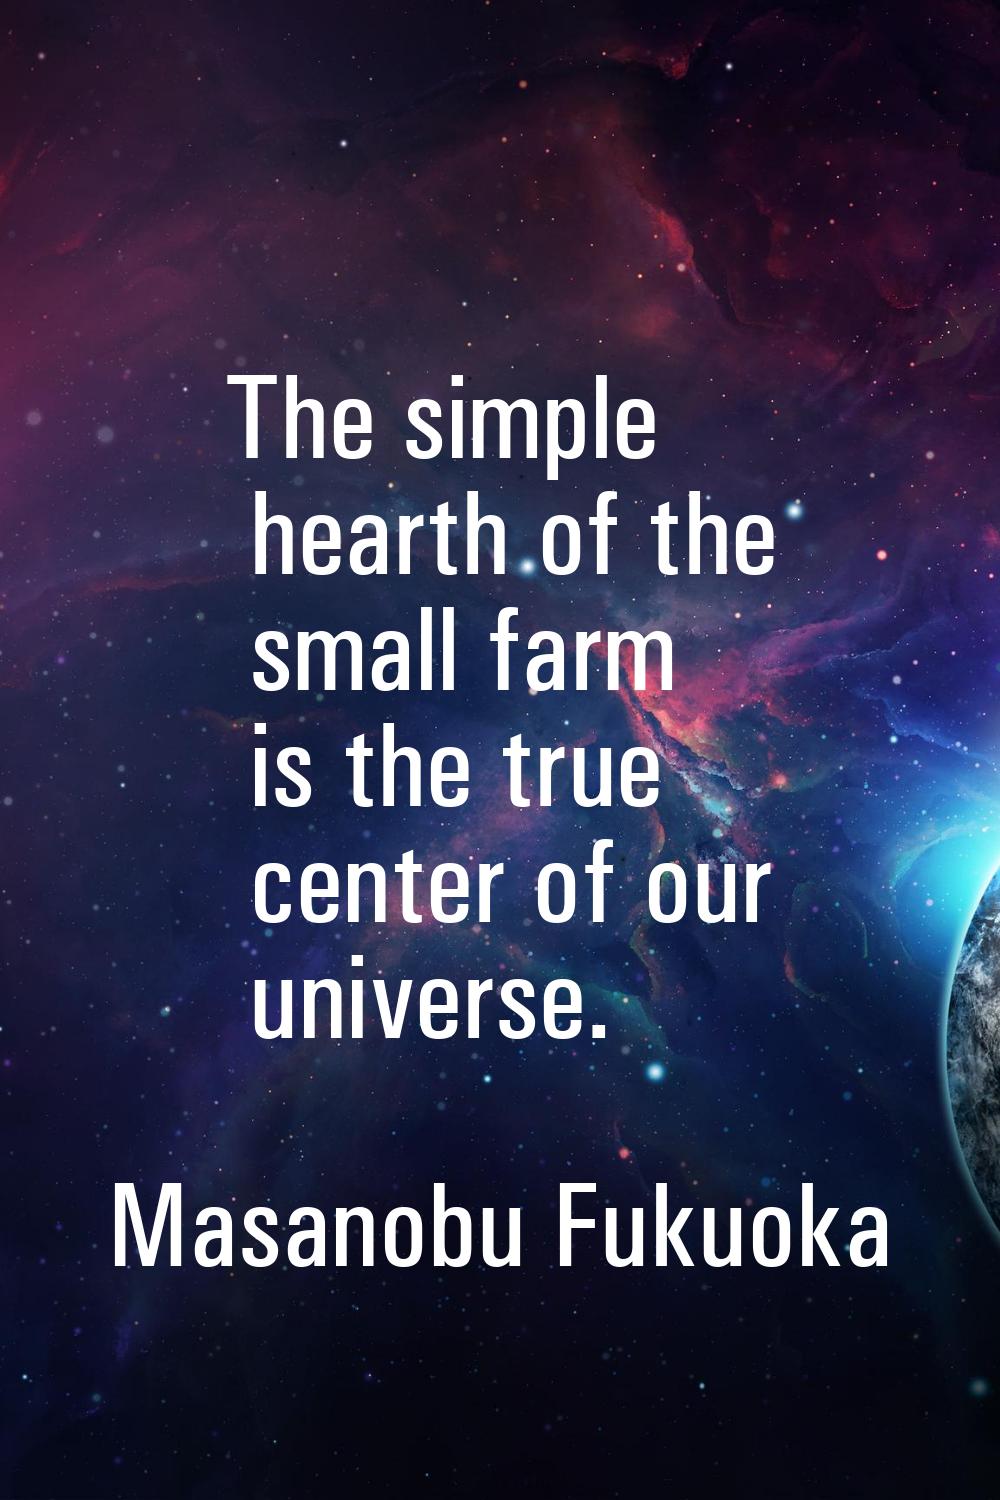 The simple hearth of the small farm is the true center of our universe.